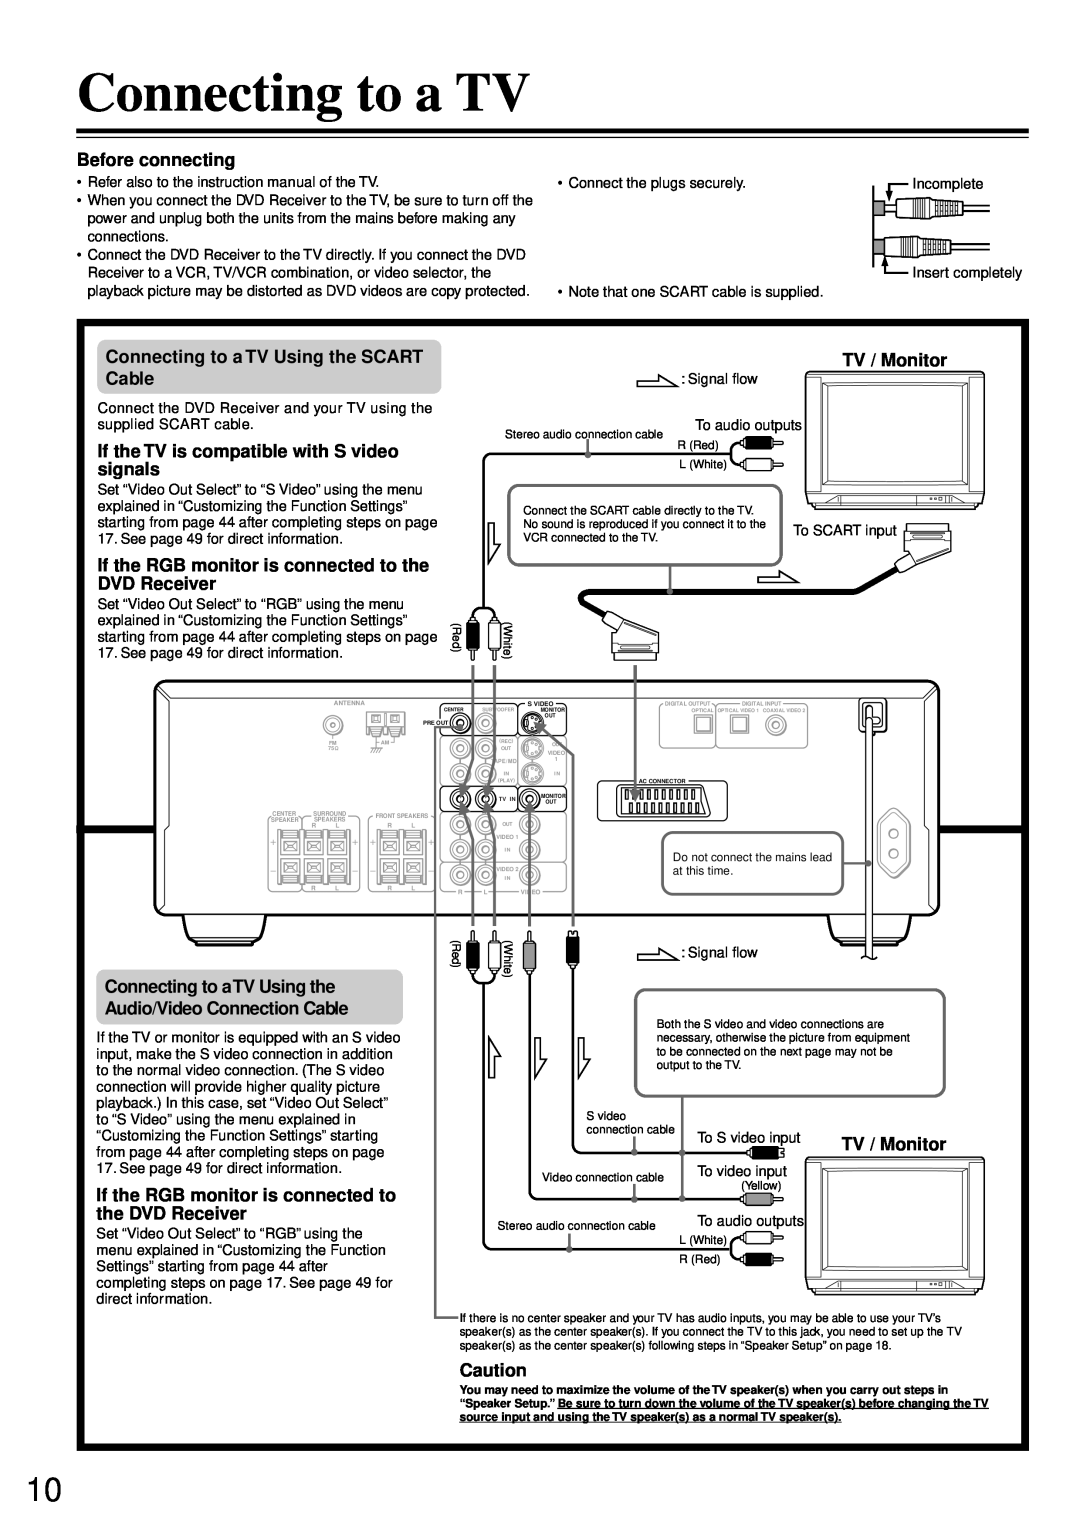 Onkyo DR-90 instruction manual Before connecting, Connecting to a TV Using the SCART Cable, TV / Monitor 